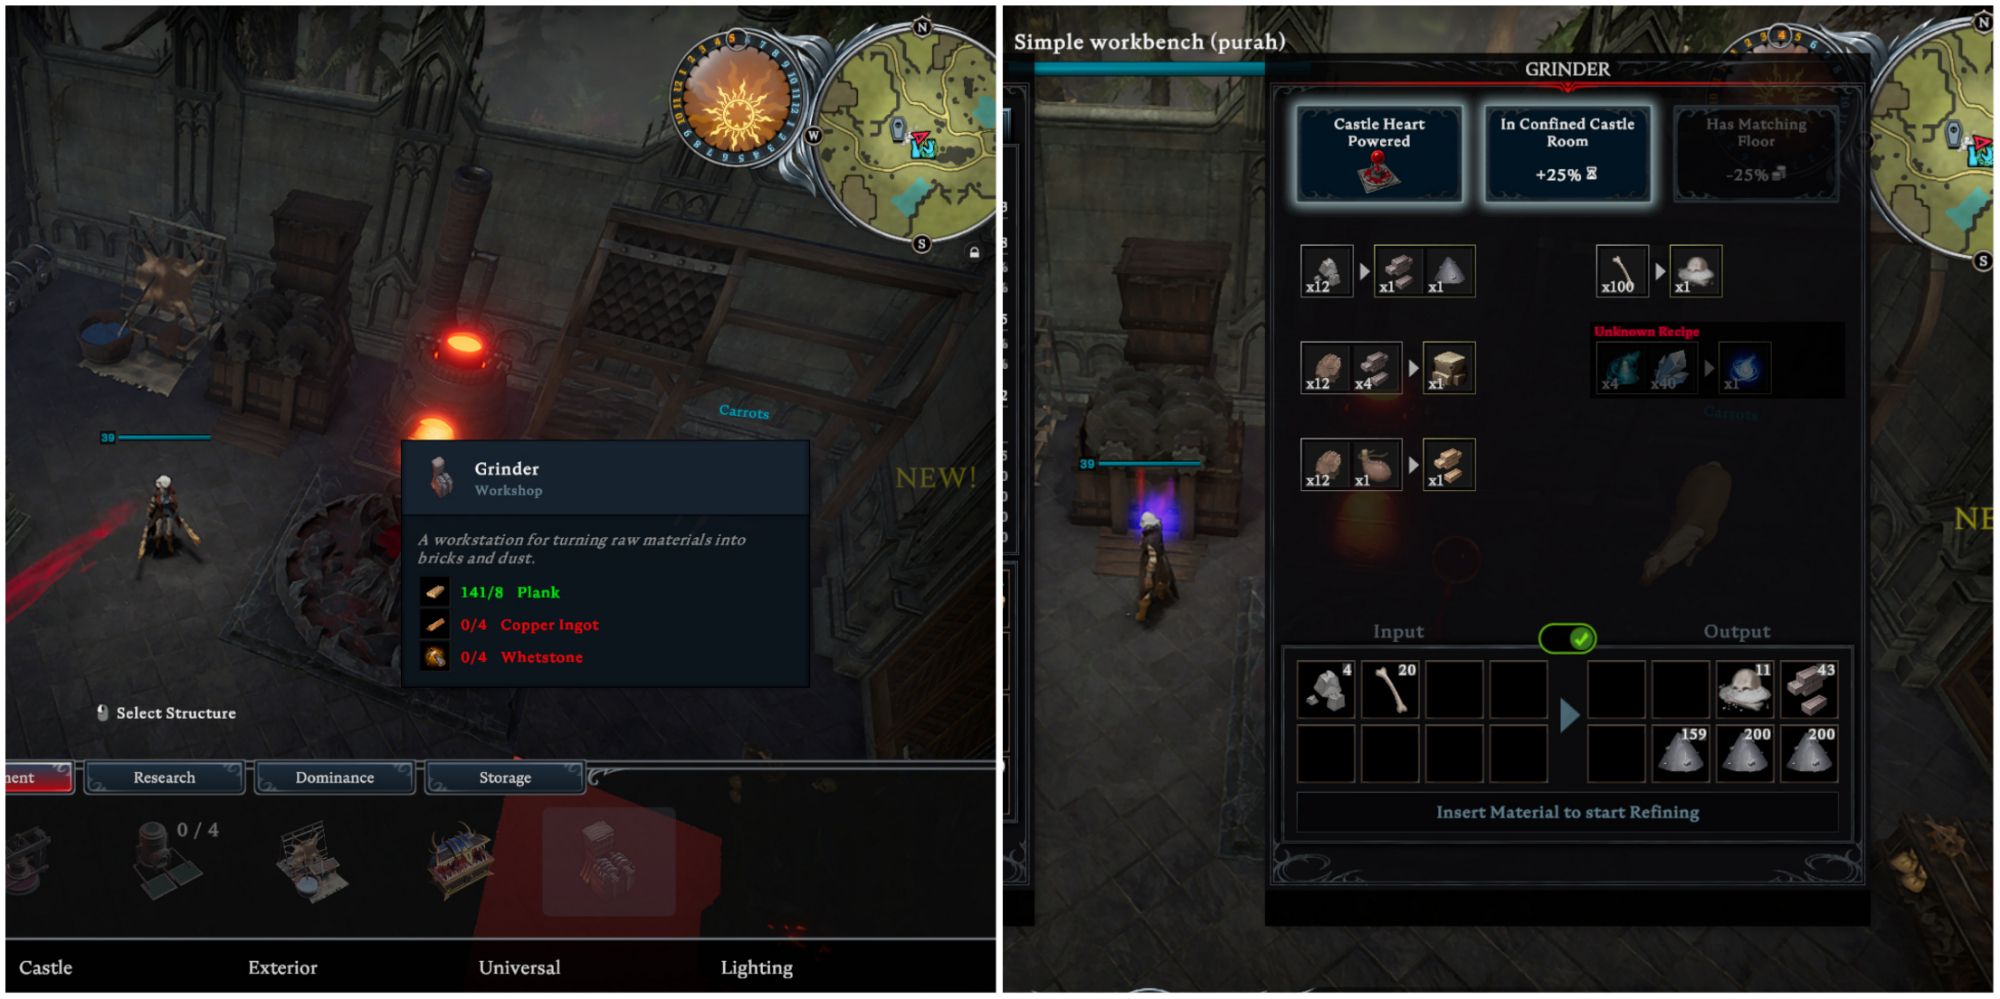 A split image of Grinder construction menu and Grinder menu showing bones and stone turning into crafting materials